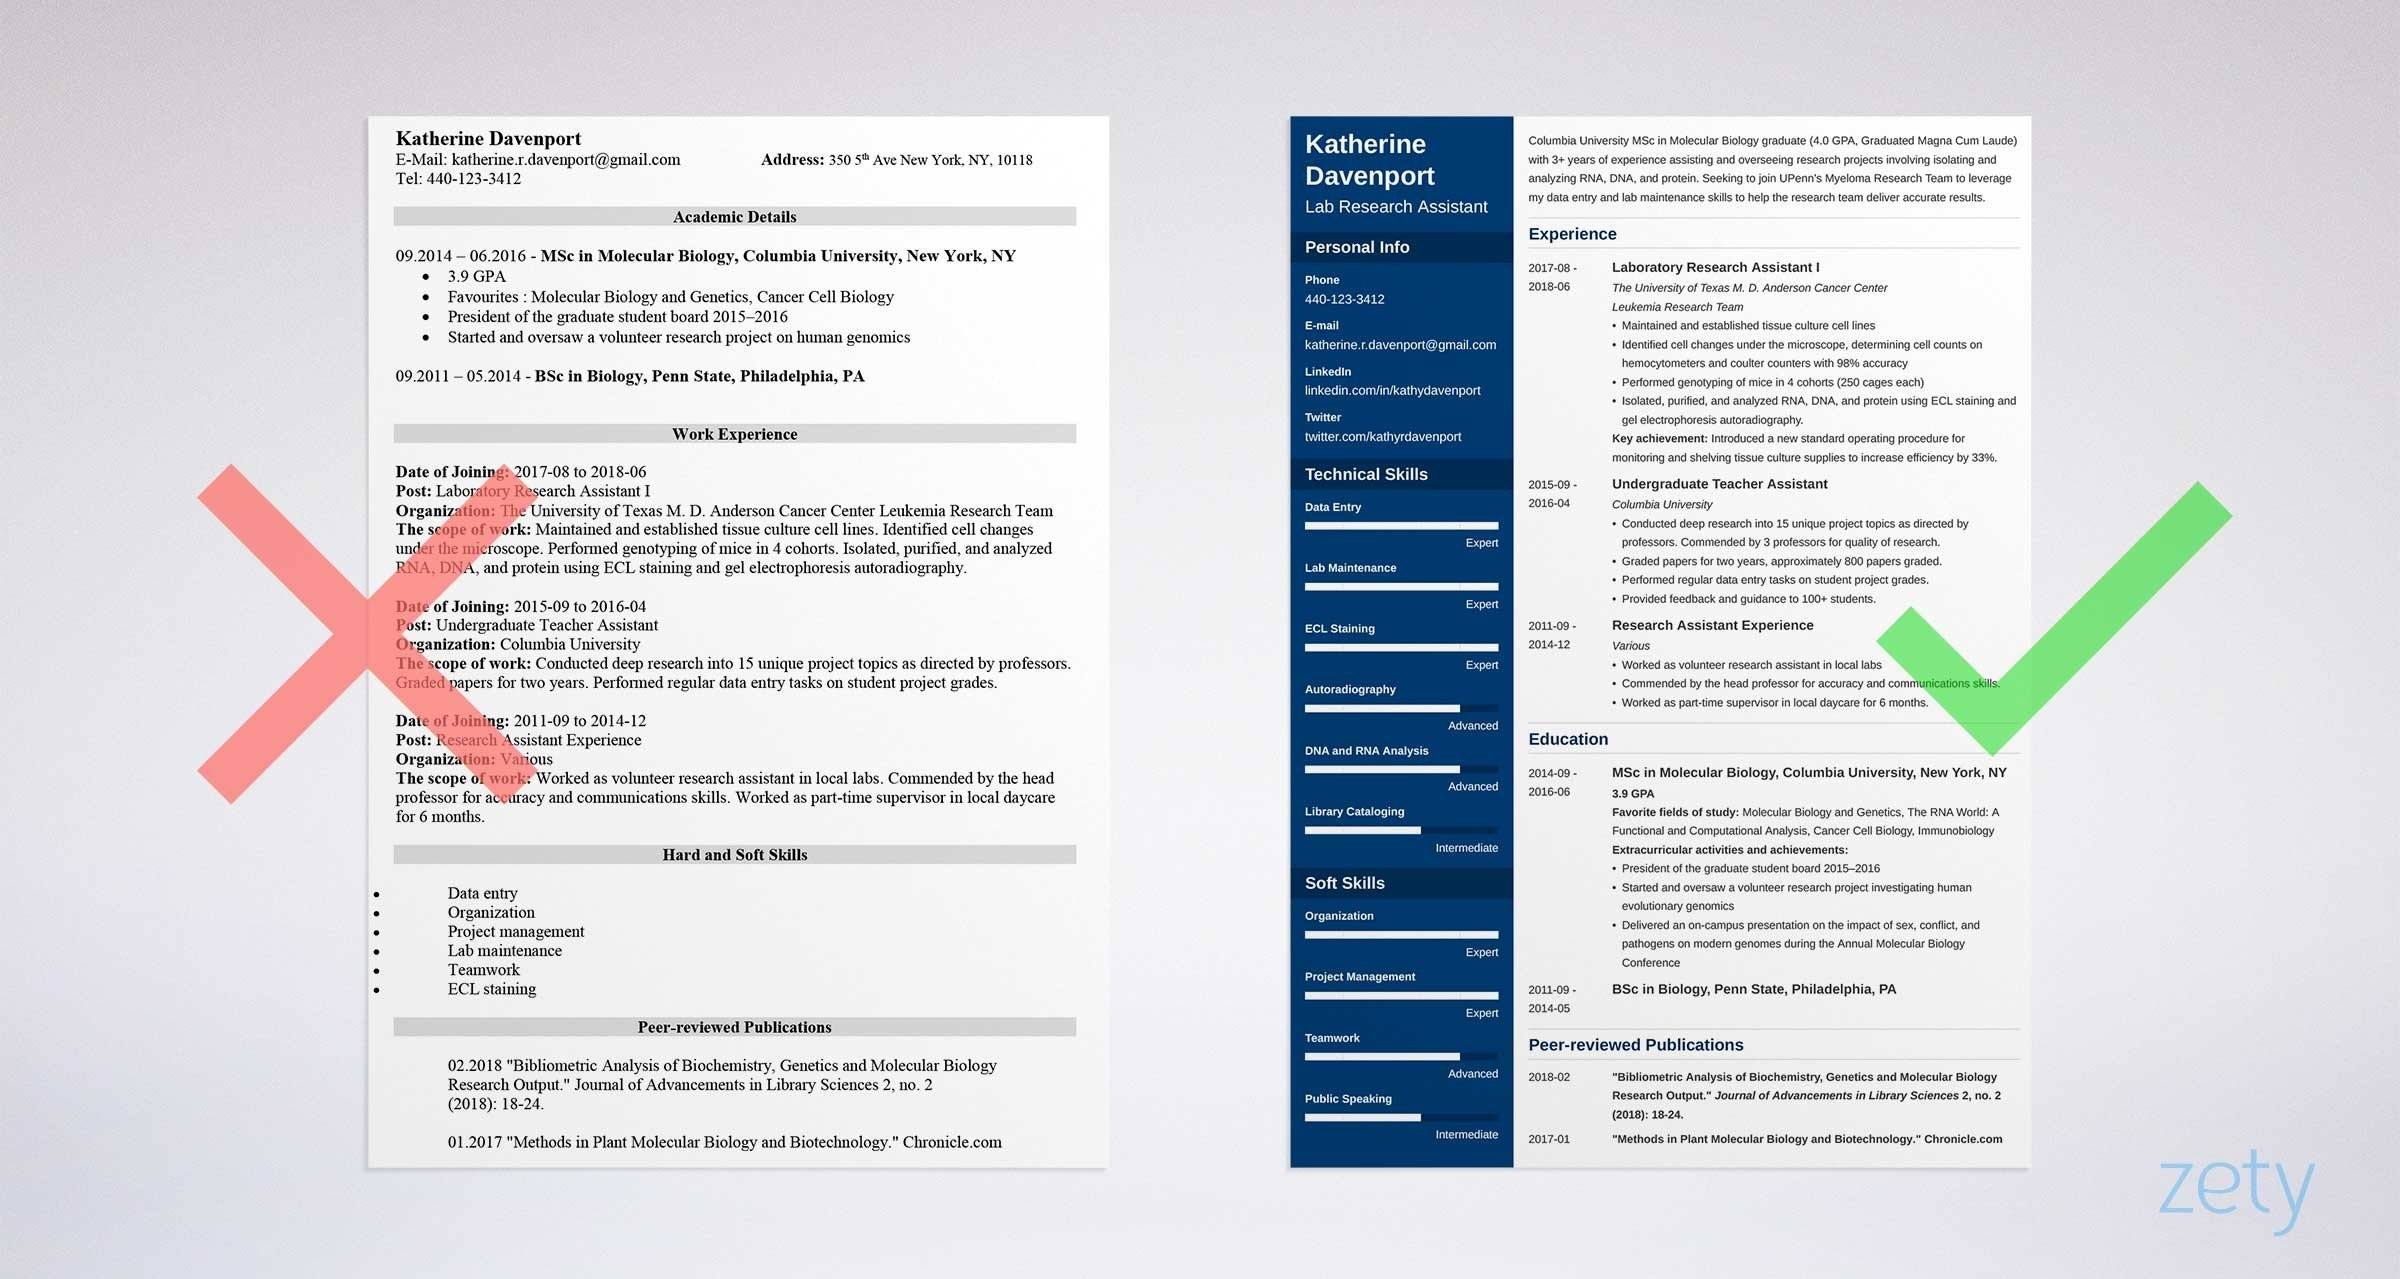 Sample Resume for Graduate assistant Position Research assistant Resume: Sample Job Description & Skills